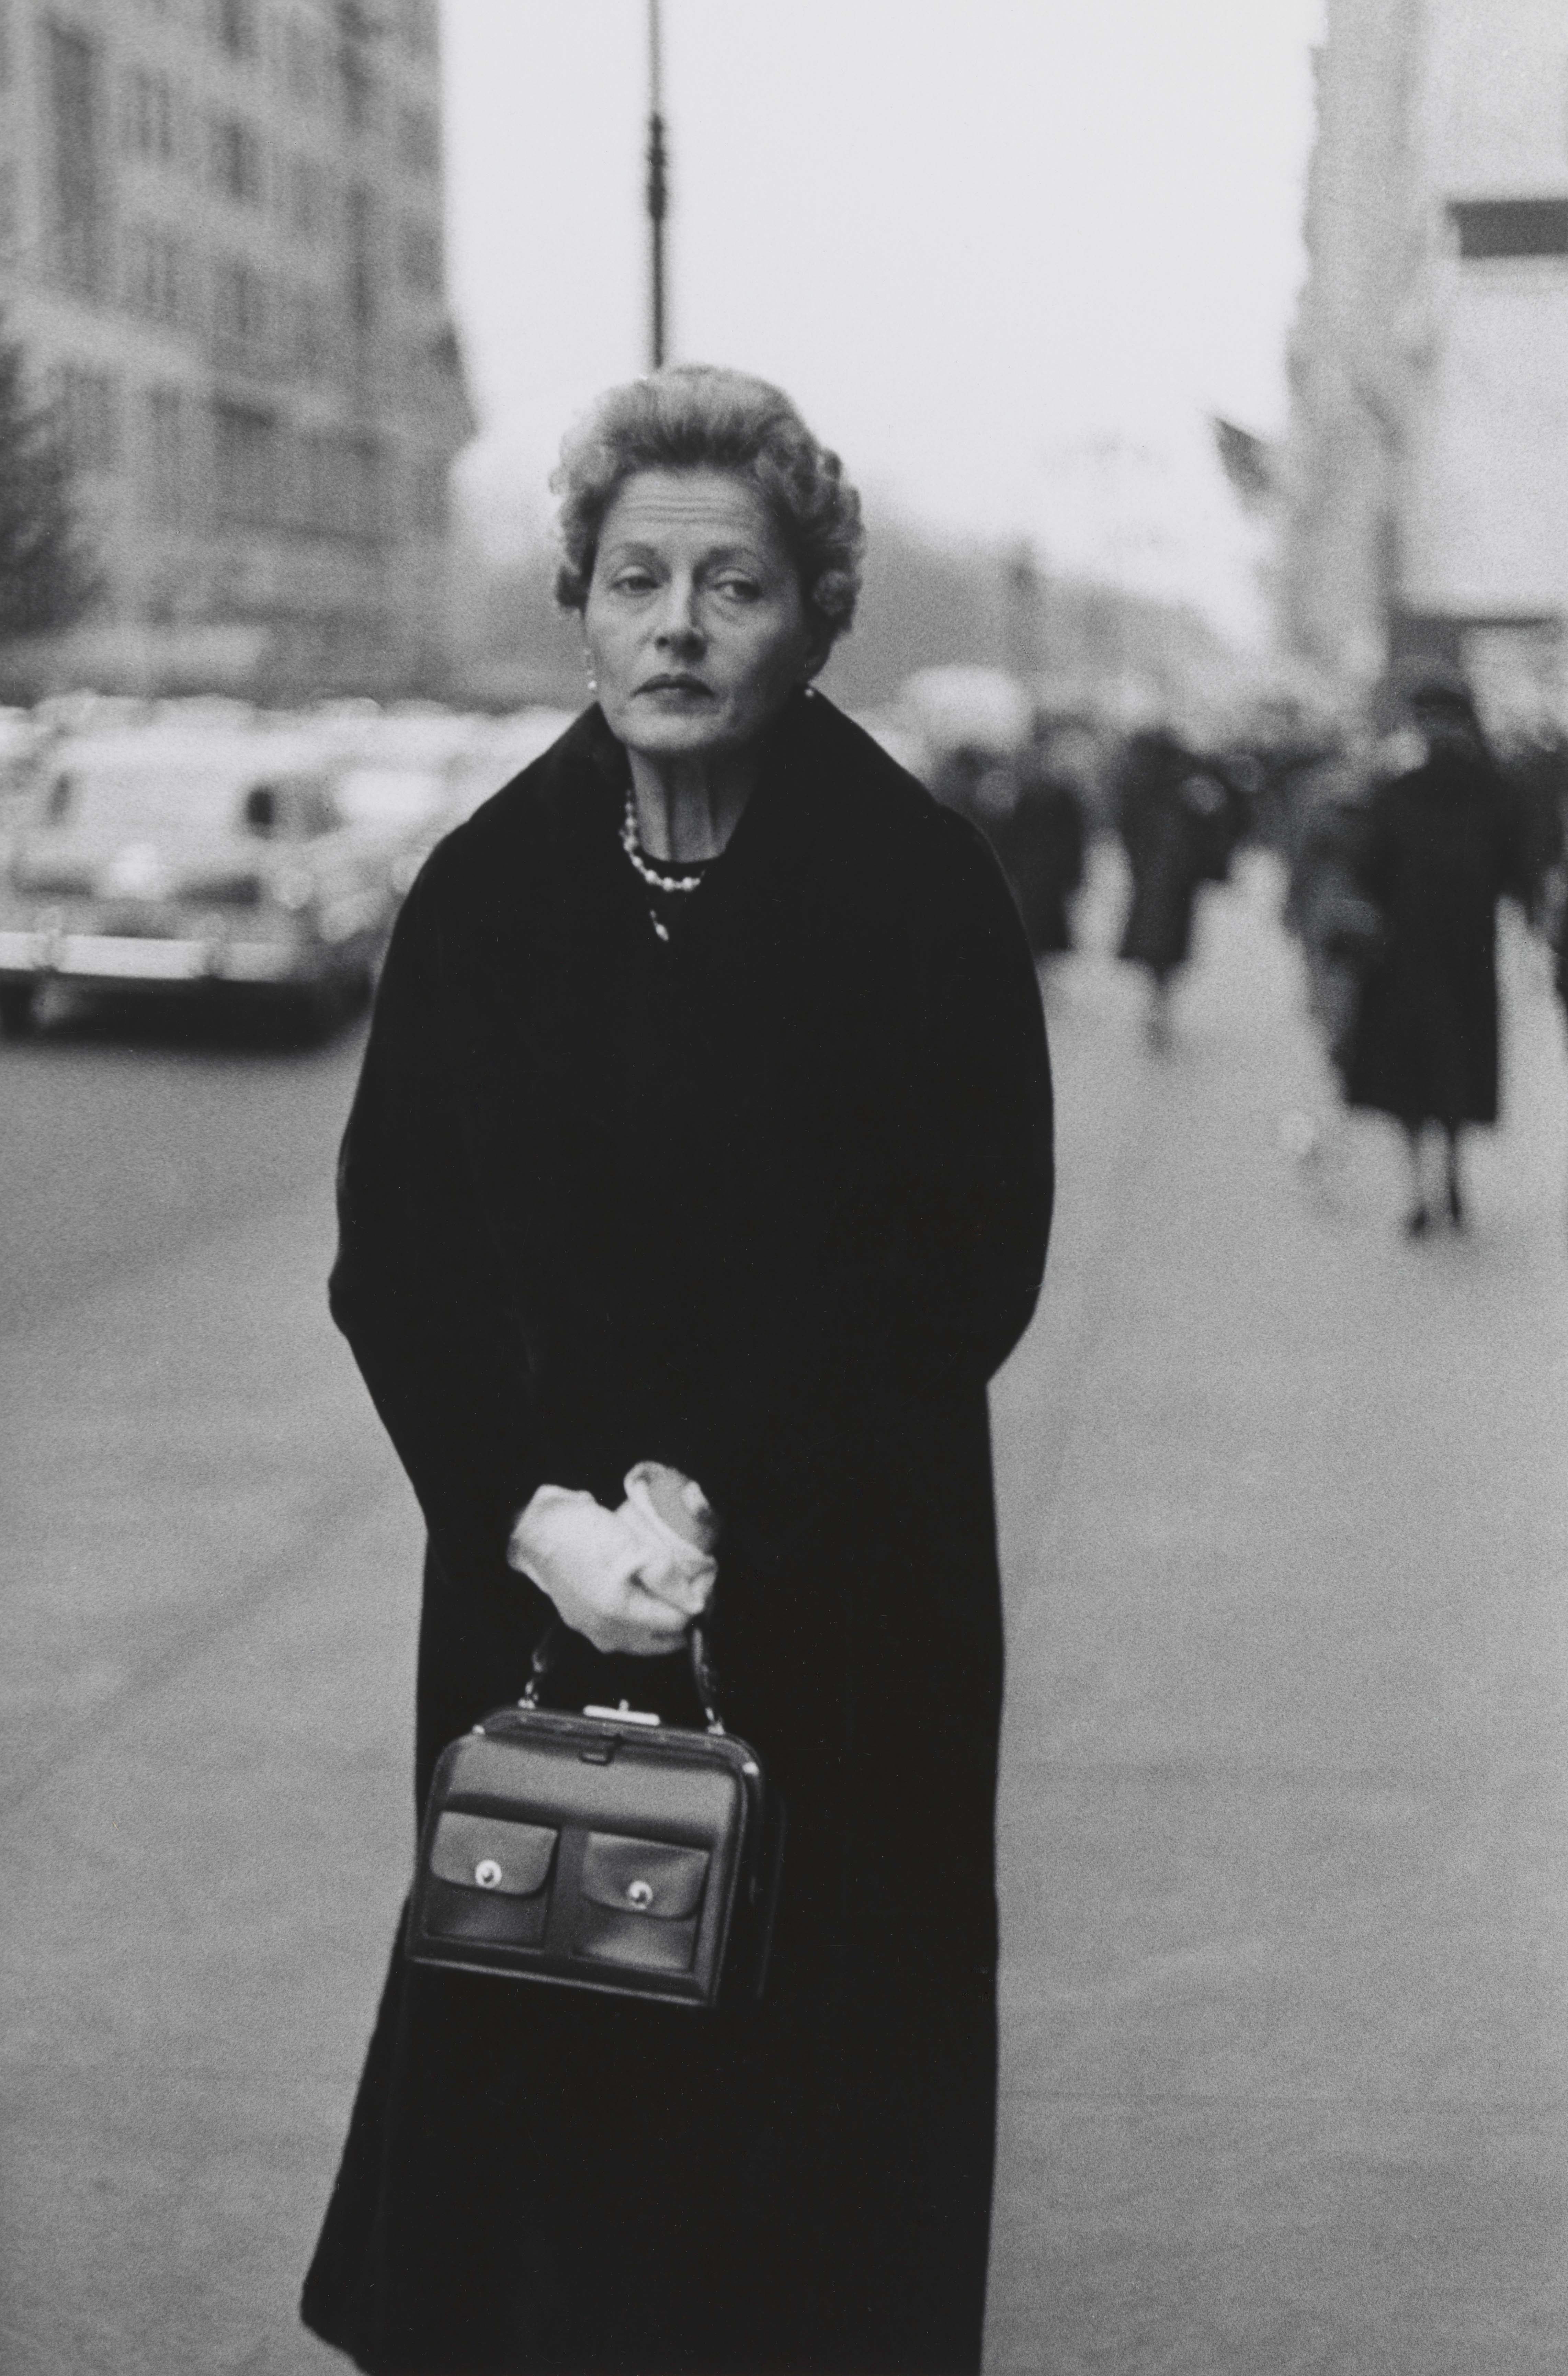 Diane Arbus. Woman with white gloves and a pocket book, NYC 1956. Gelatin silver print. 10 × 6½ in. © The estate of Diane Arbus, LLC. All rights reserved.